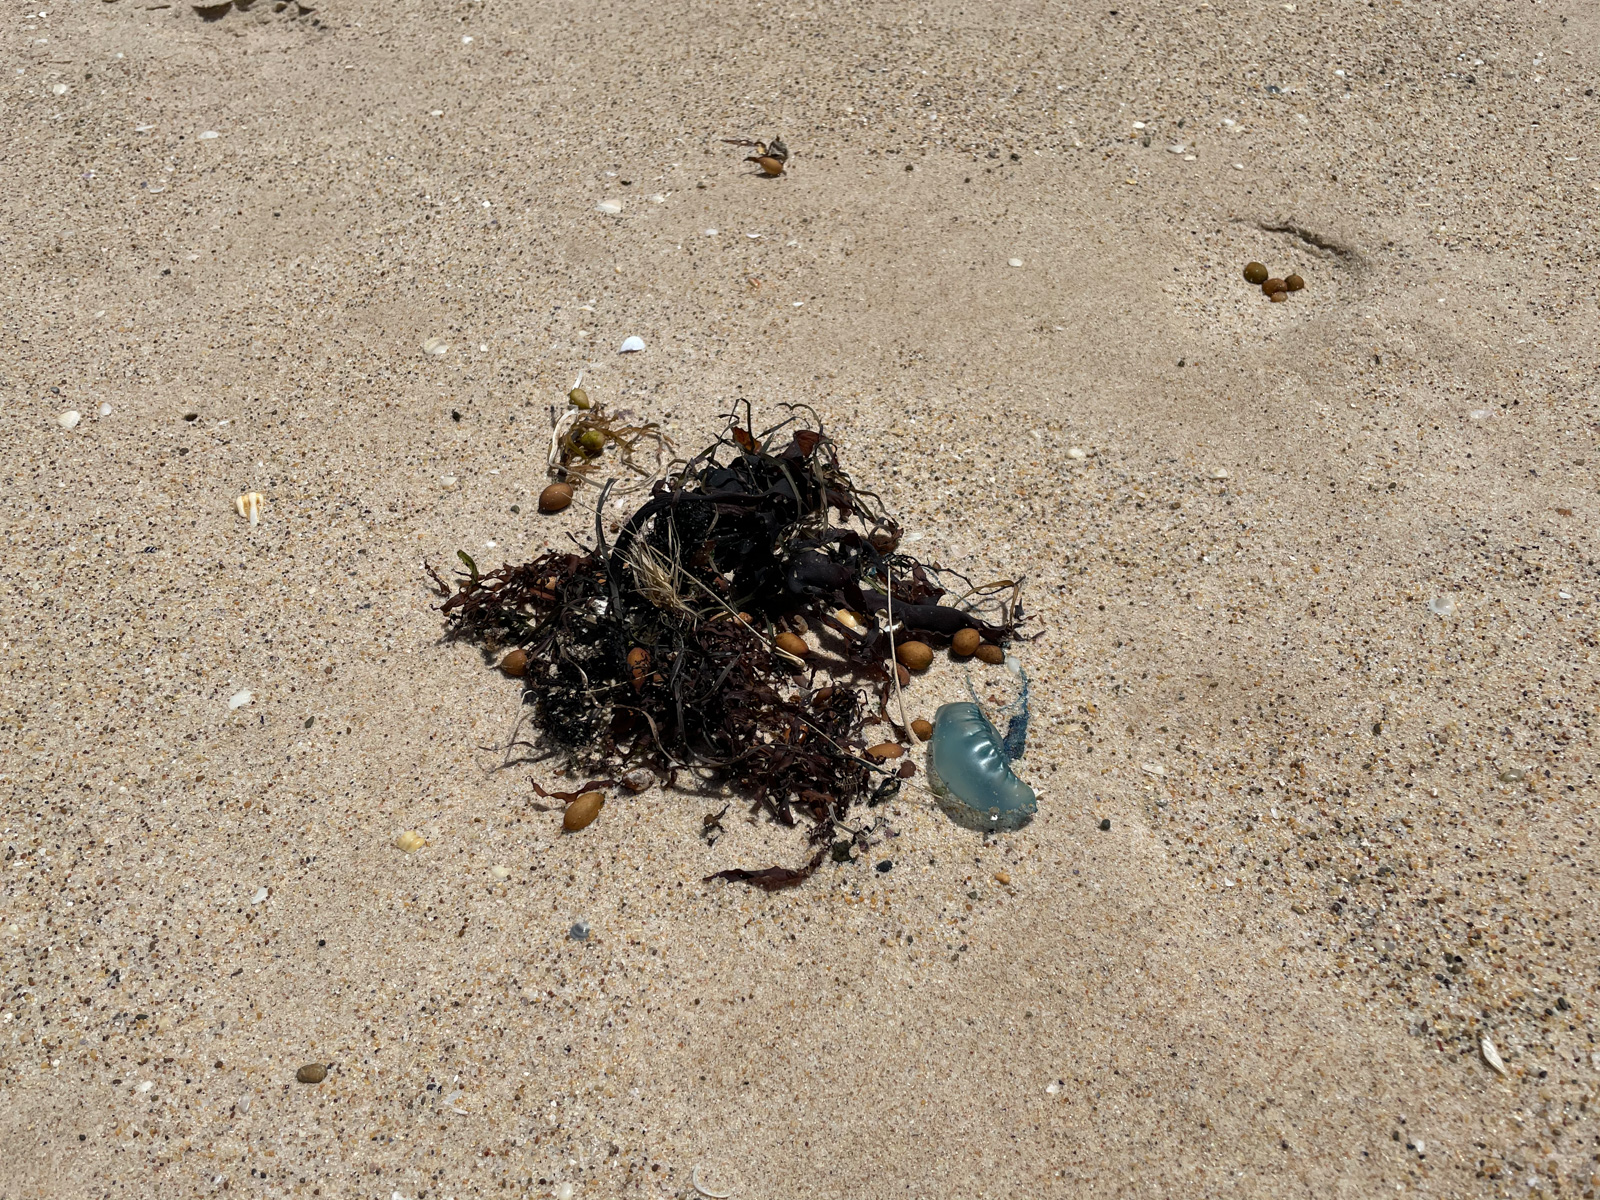 A bluebottle jellyfish washed up on the shore of a beach, alongside some seaweed.